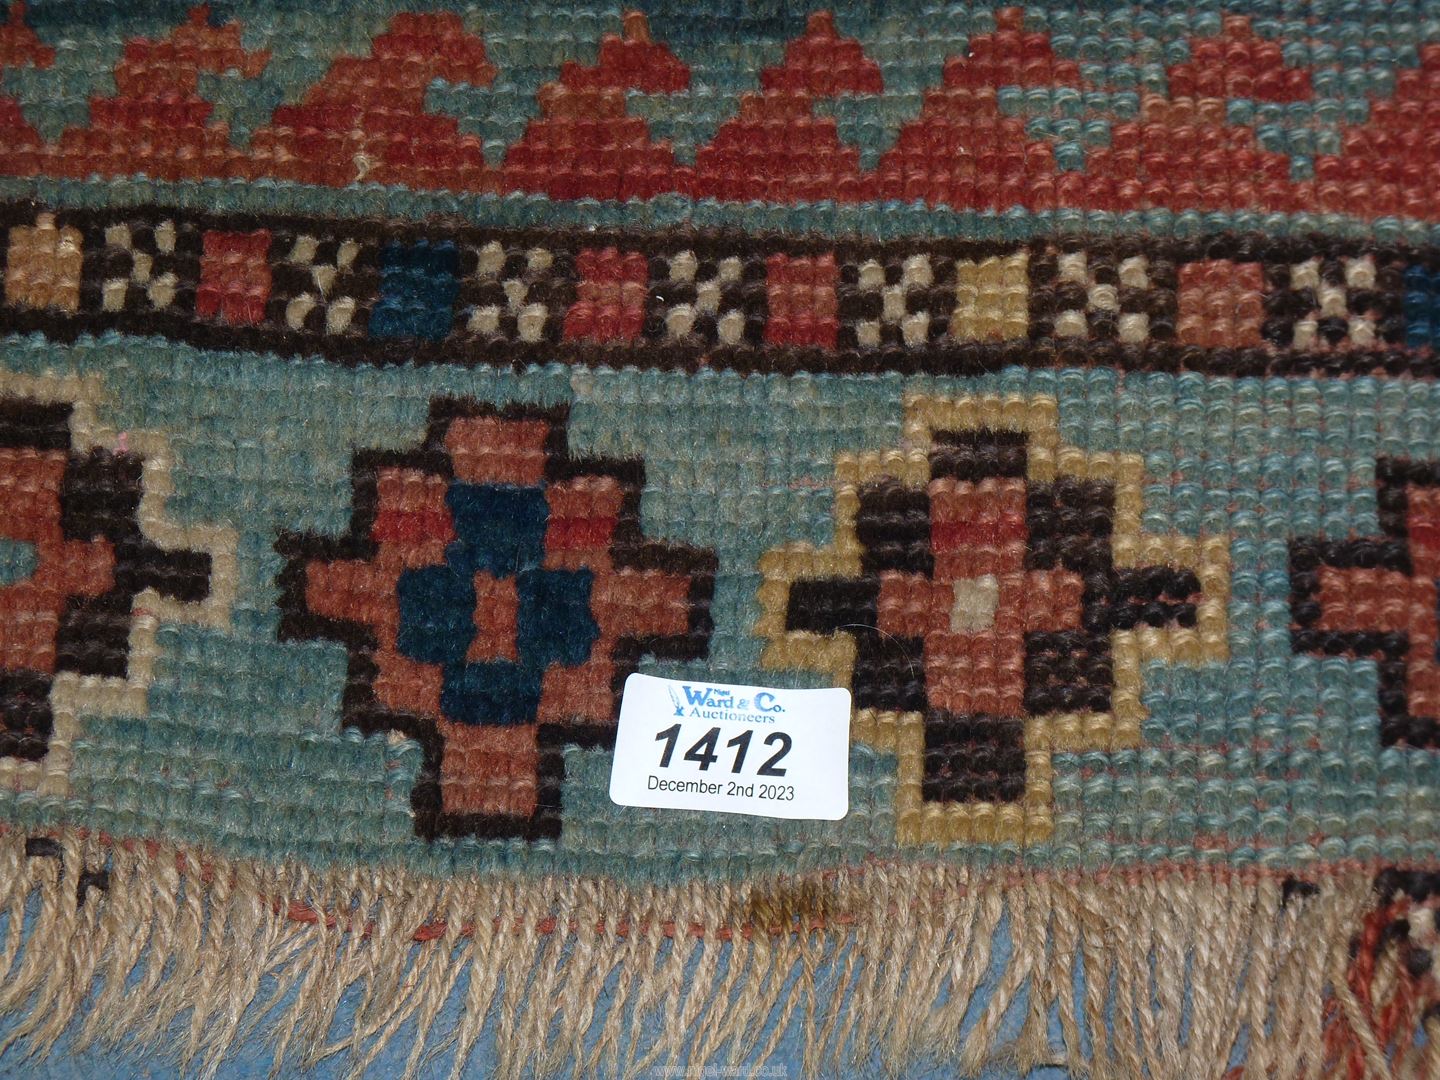 A border pattern rug in blue ground with red and cream geometric patterns, worn condition, - Image 2 of 4